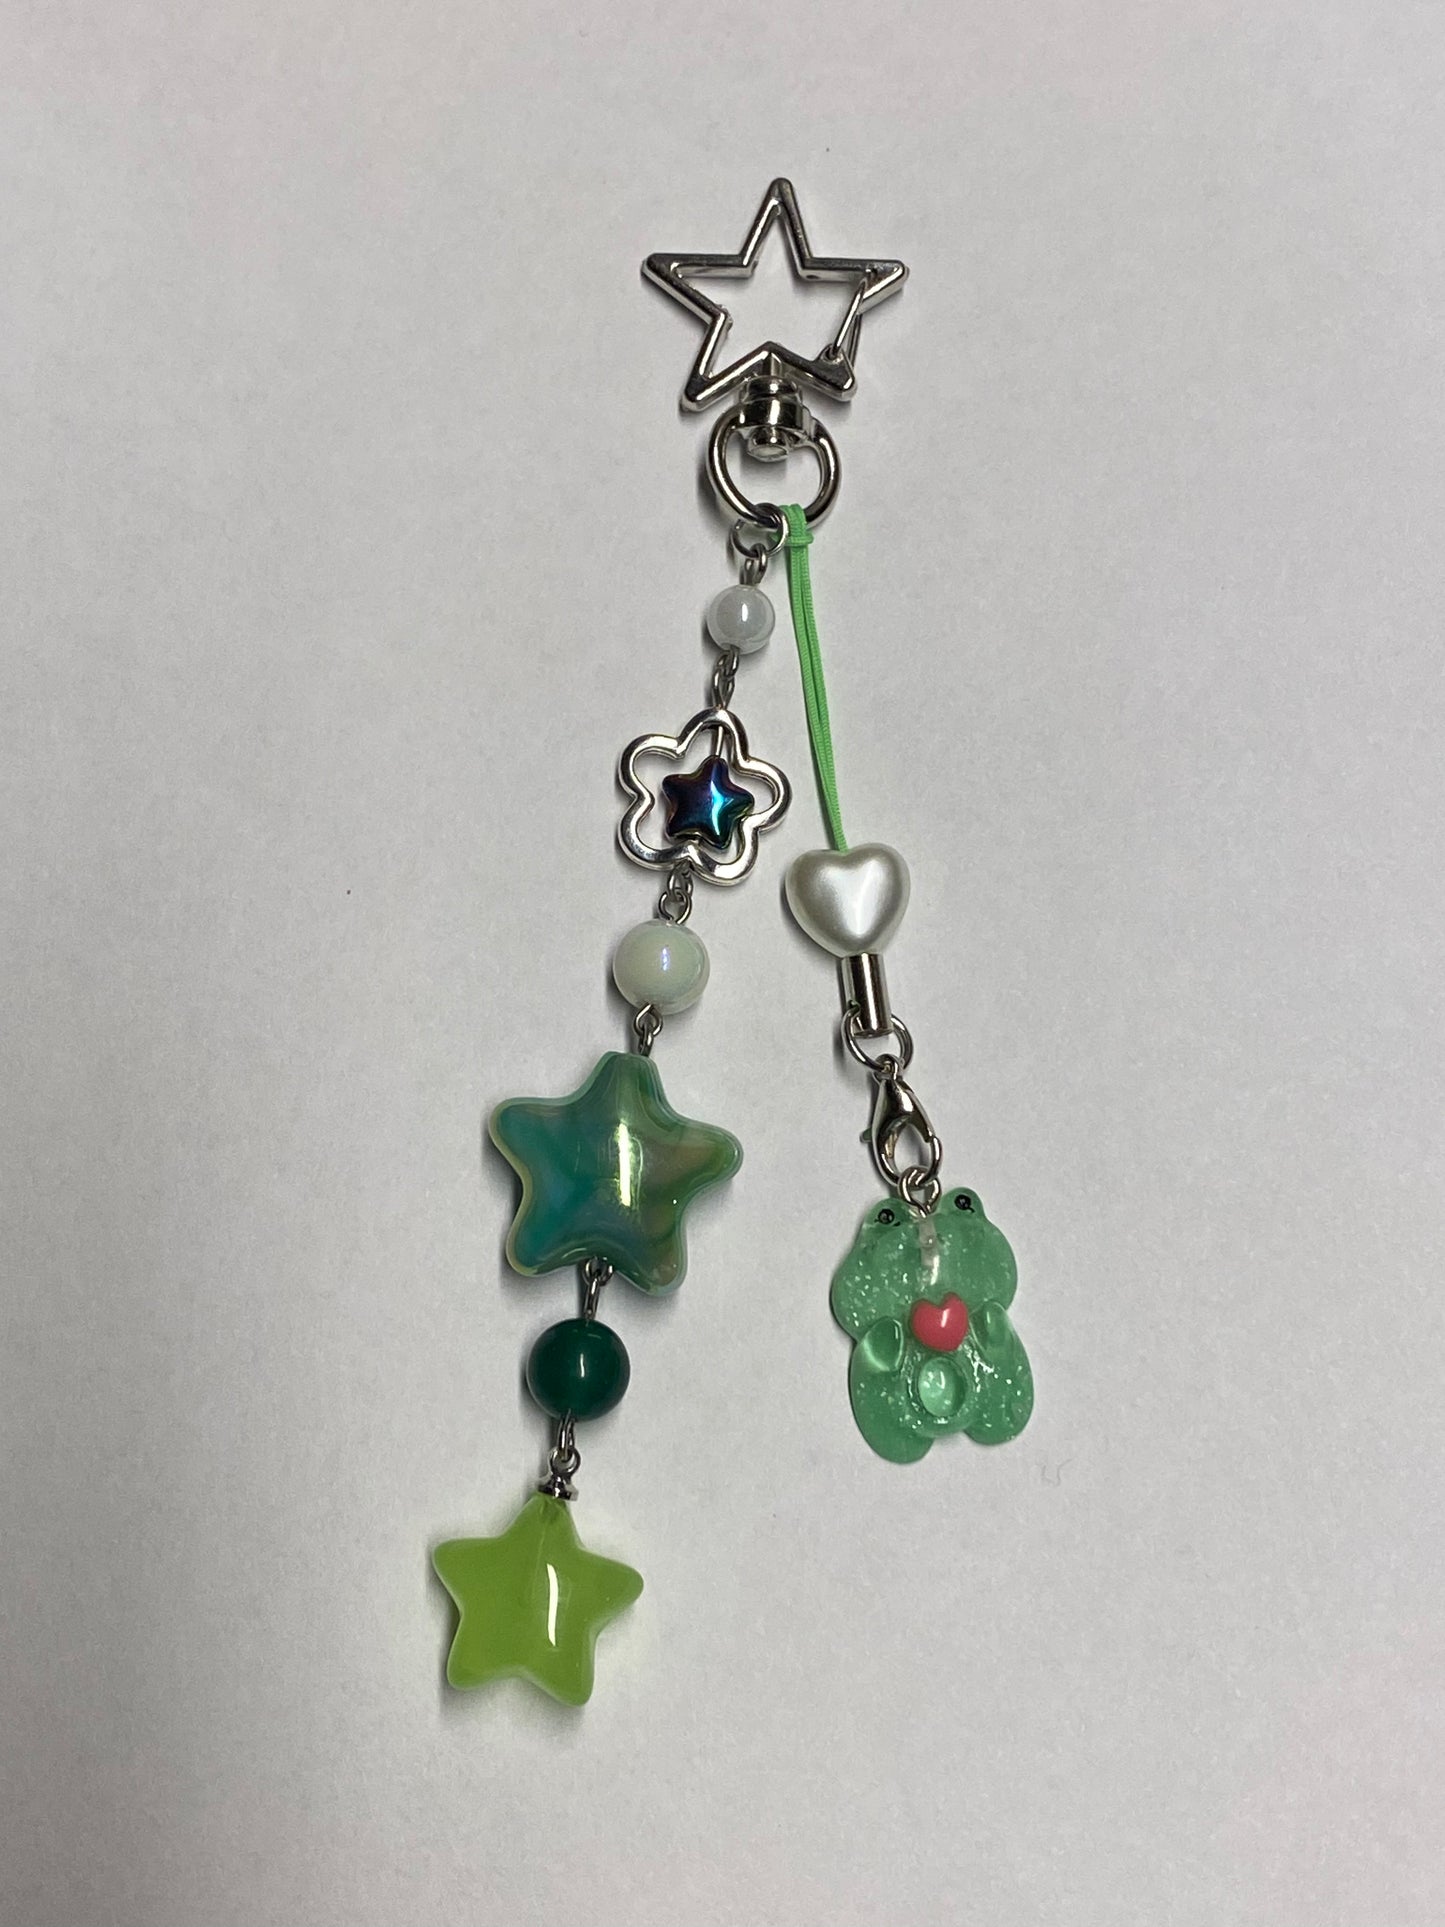 Green frog in the stars - Keychain